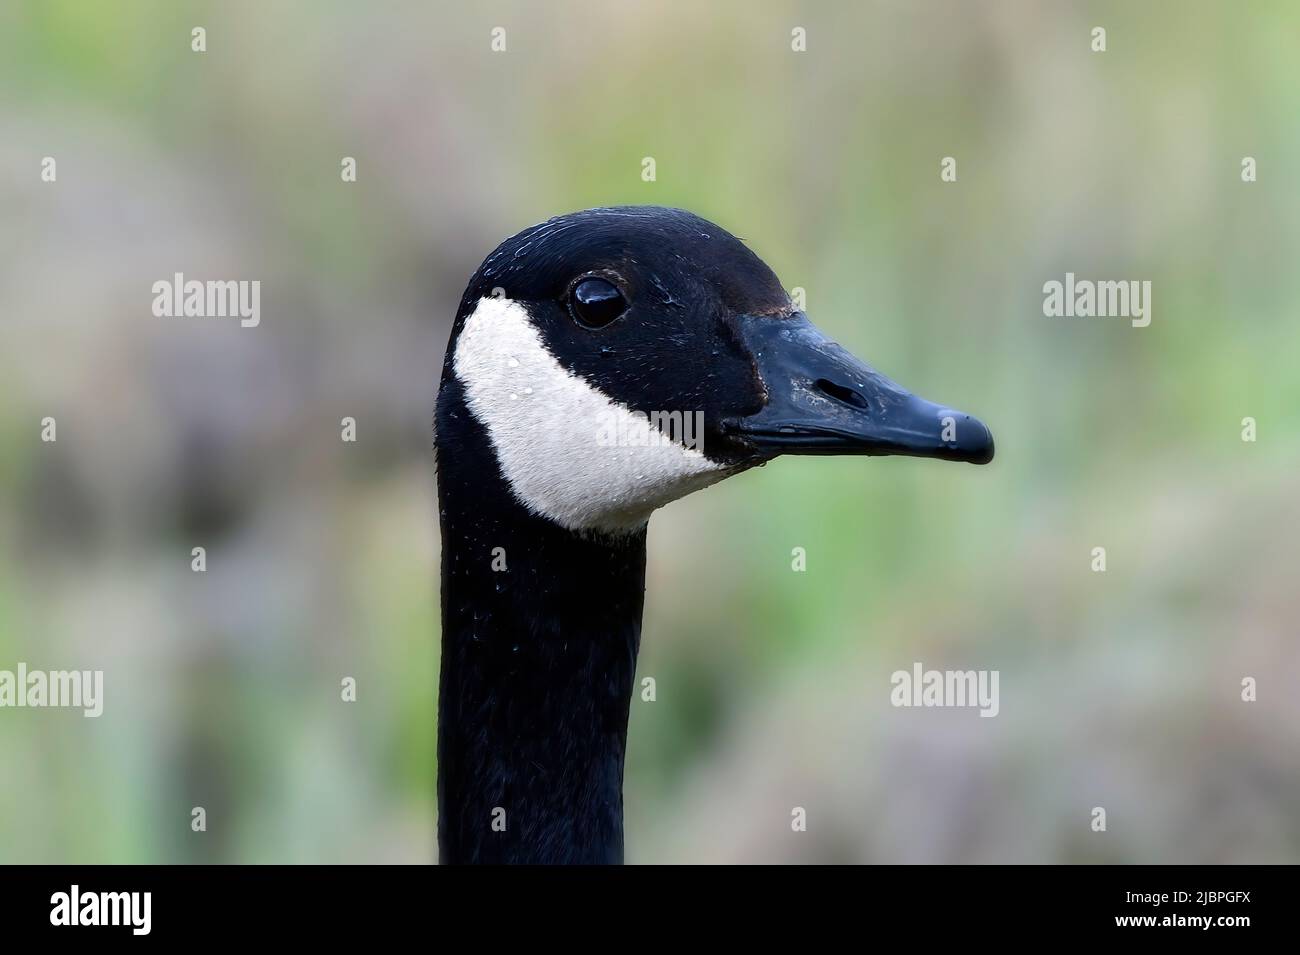 A portrait image of a Canadian Goose, (Branta canadensis); Stock Photo